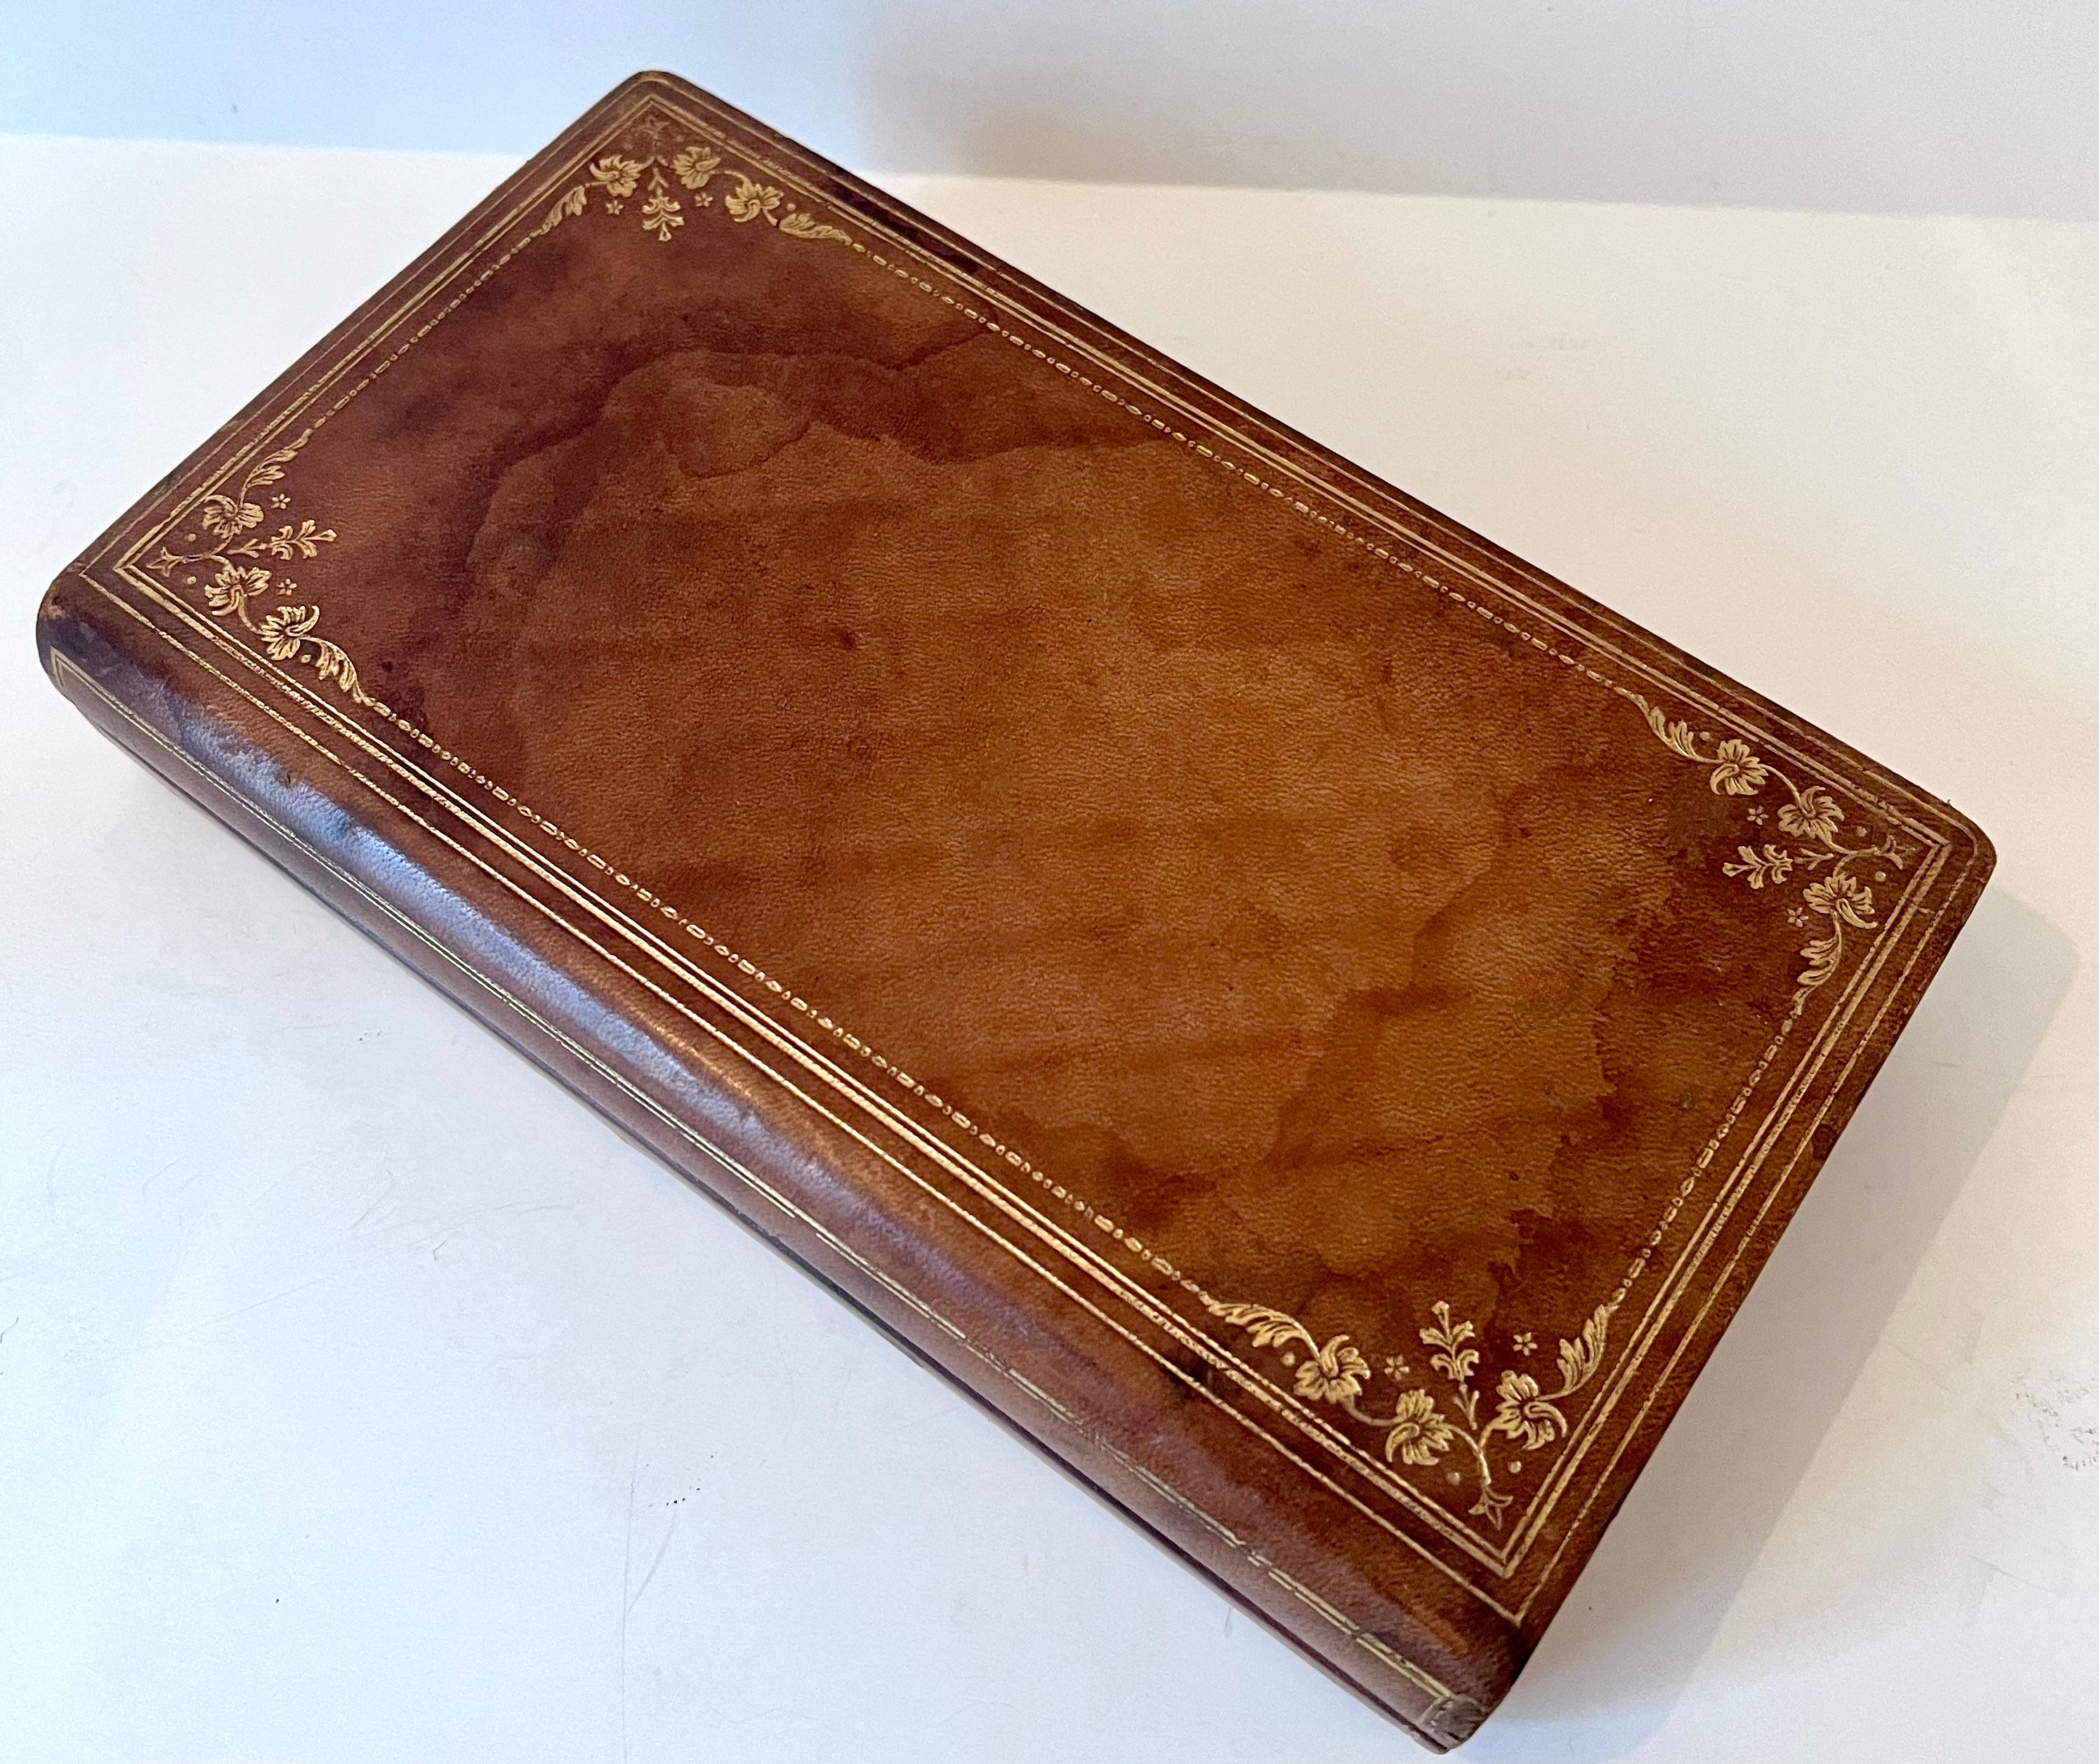 The look of a leather bound book with fine gold tooling to the exterior. Originally used for Bridge scorecard and playing cards (included). The piece is a compliment to the bookshelf or side table, desk, or workspace. 

With the hinged ease of